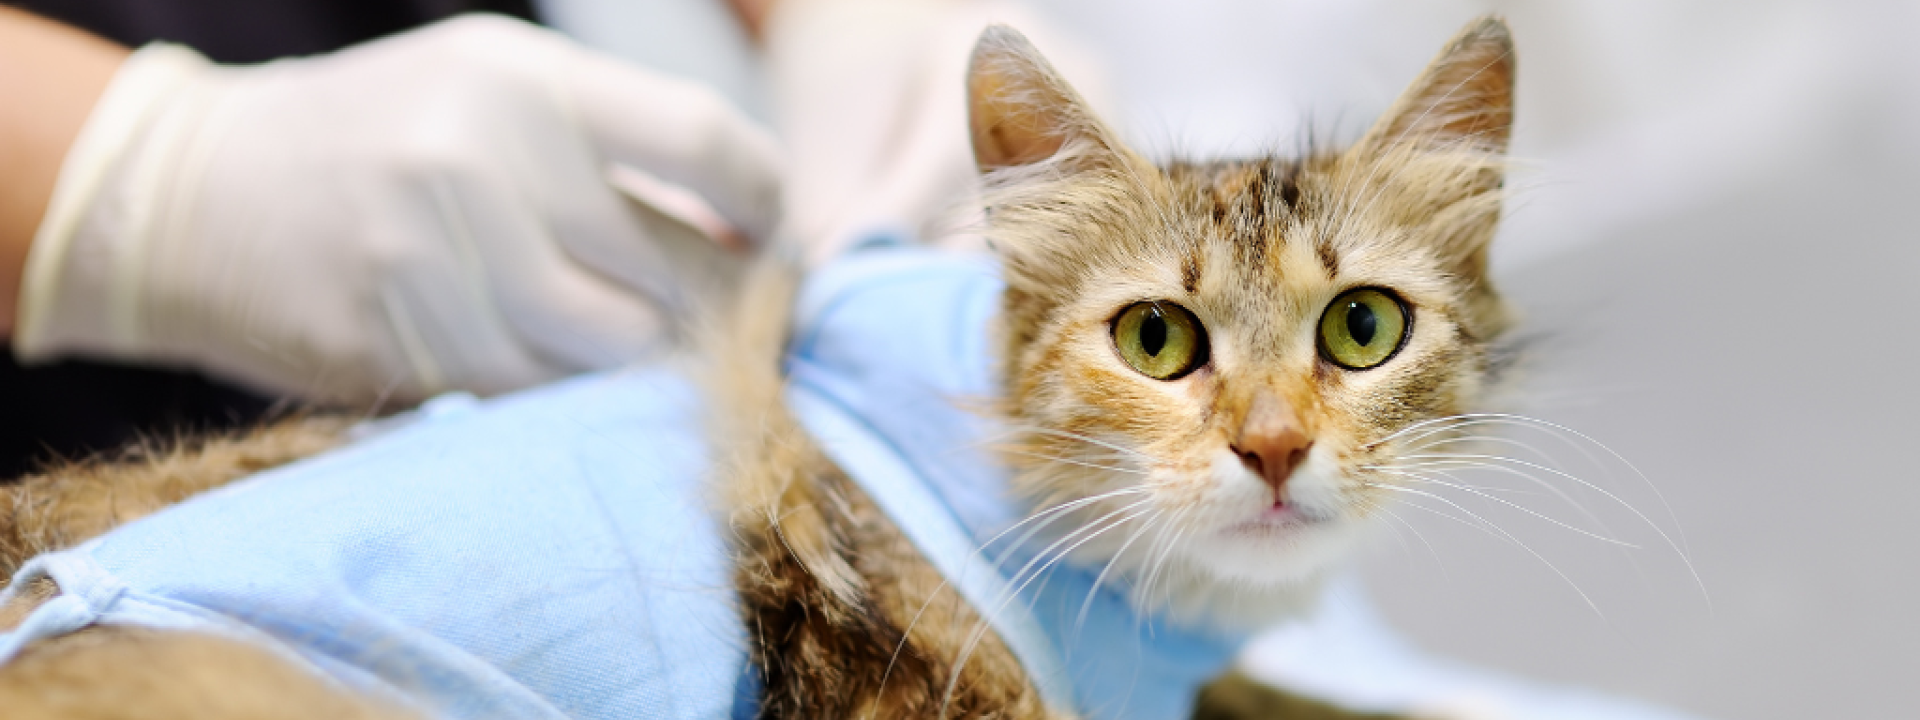 Female veterinary doctor puts the bandage on the cat after surgery.